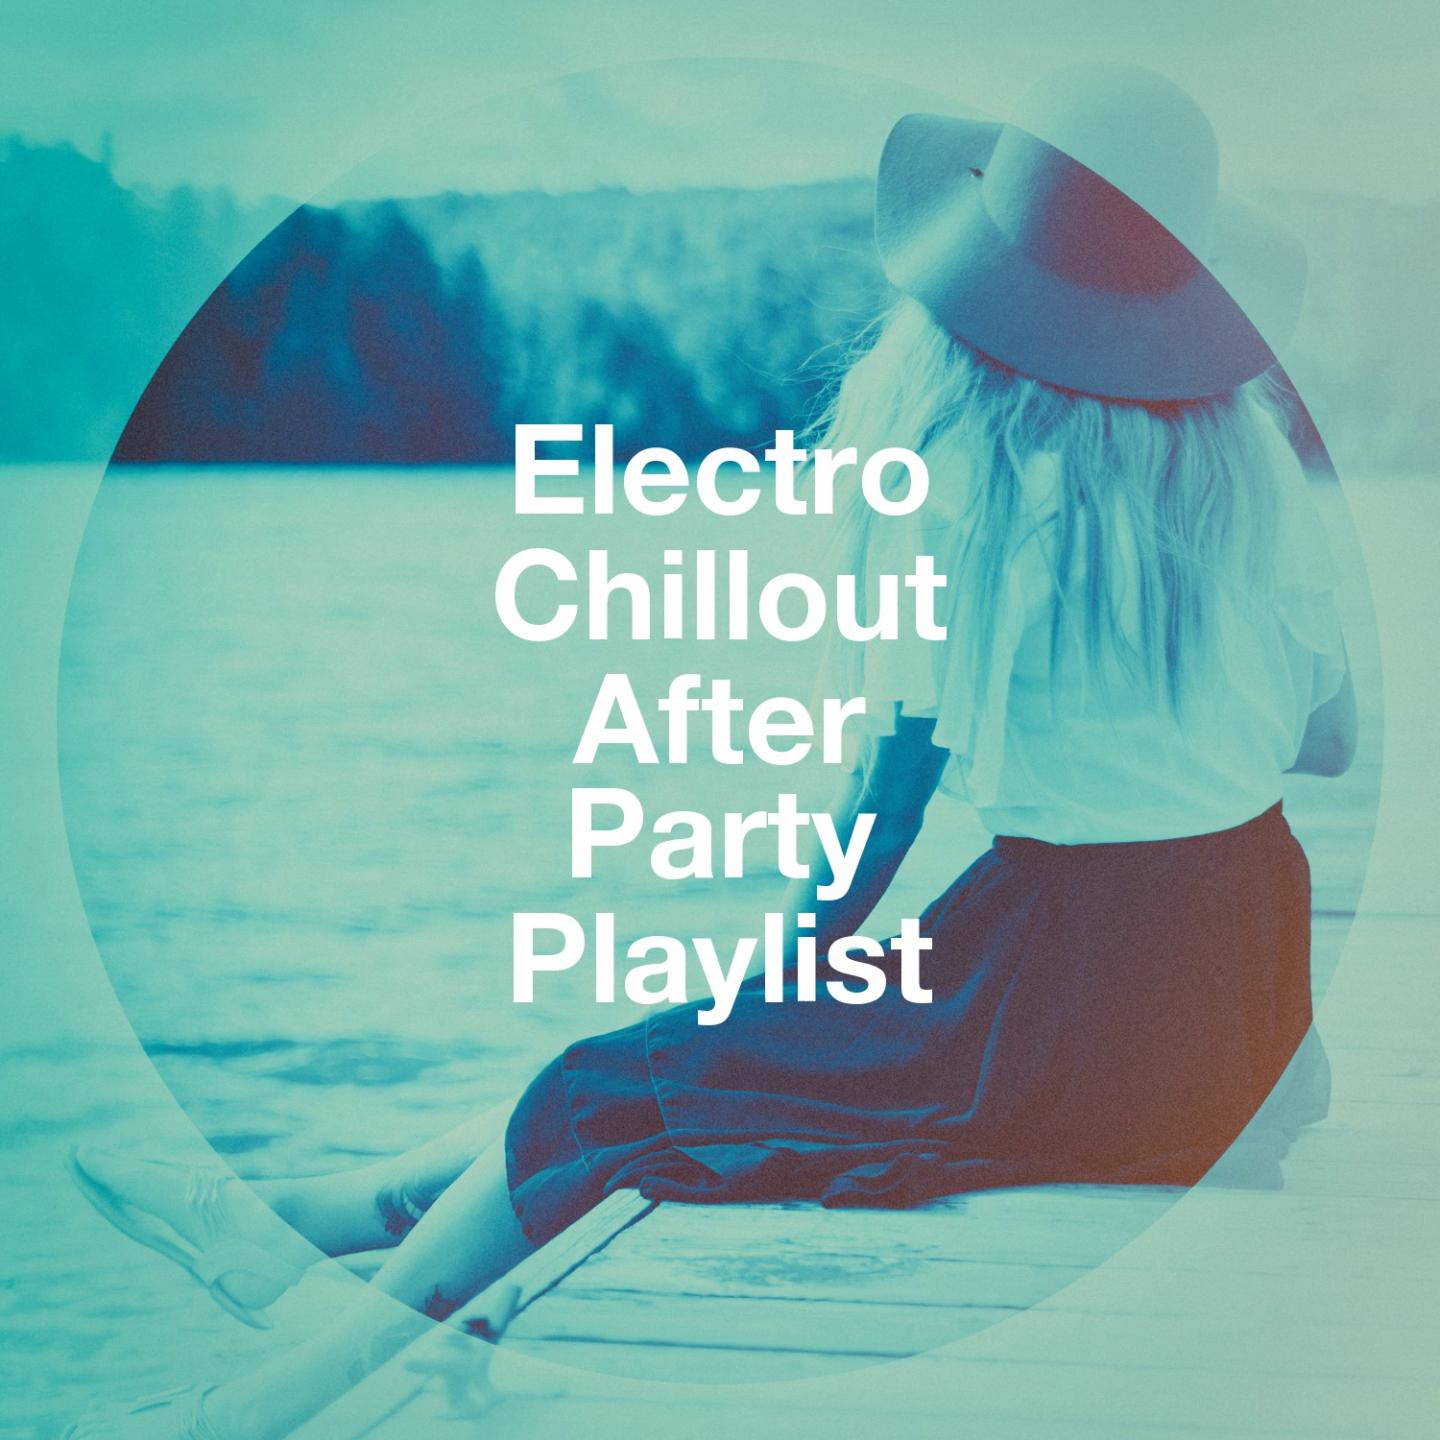 Electro Chillout After Party Playlist